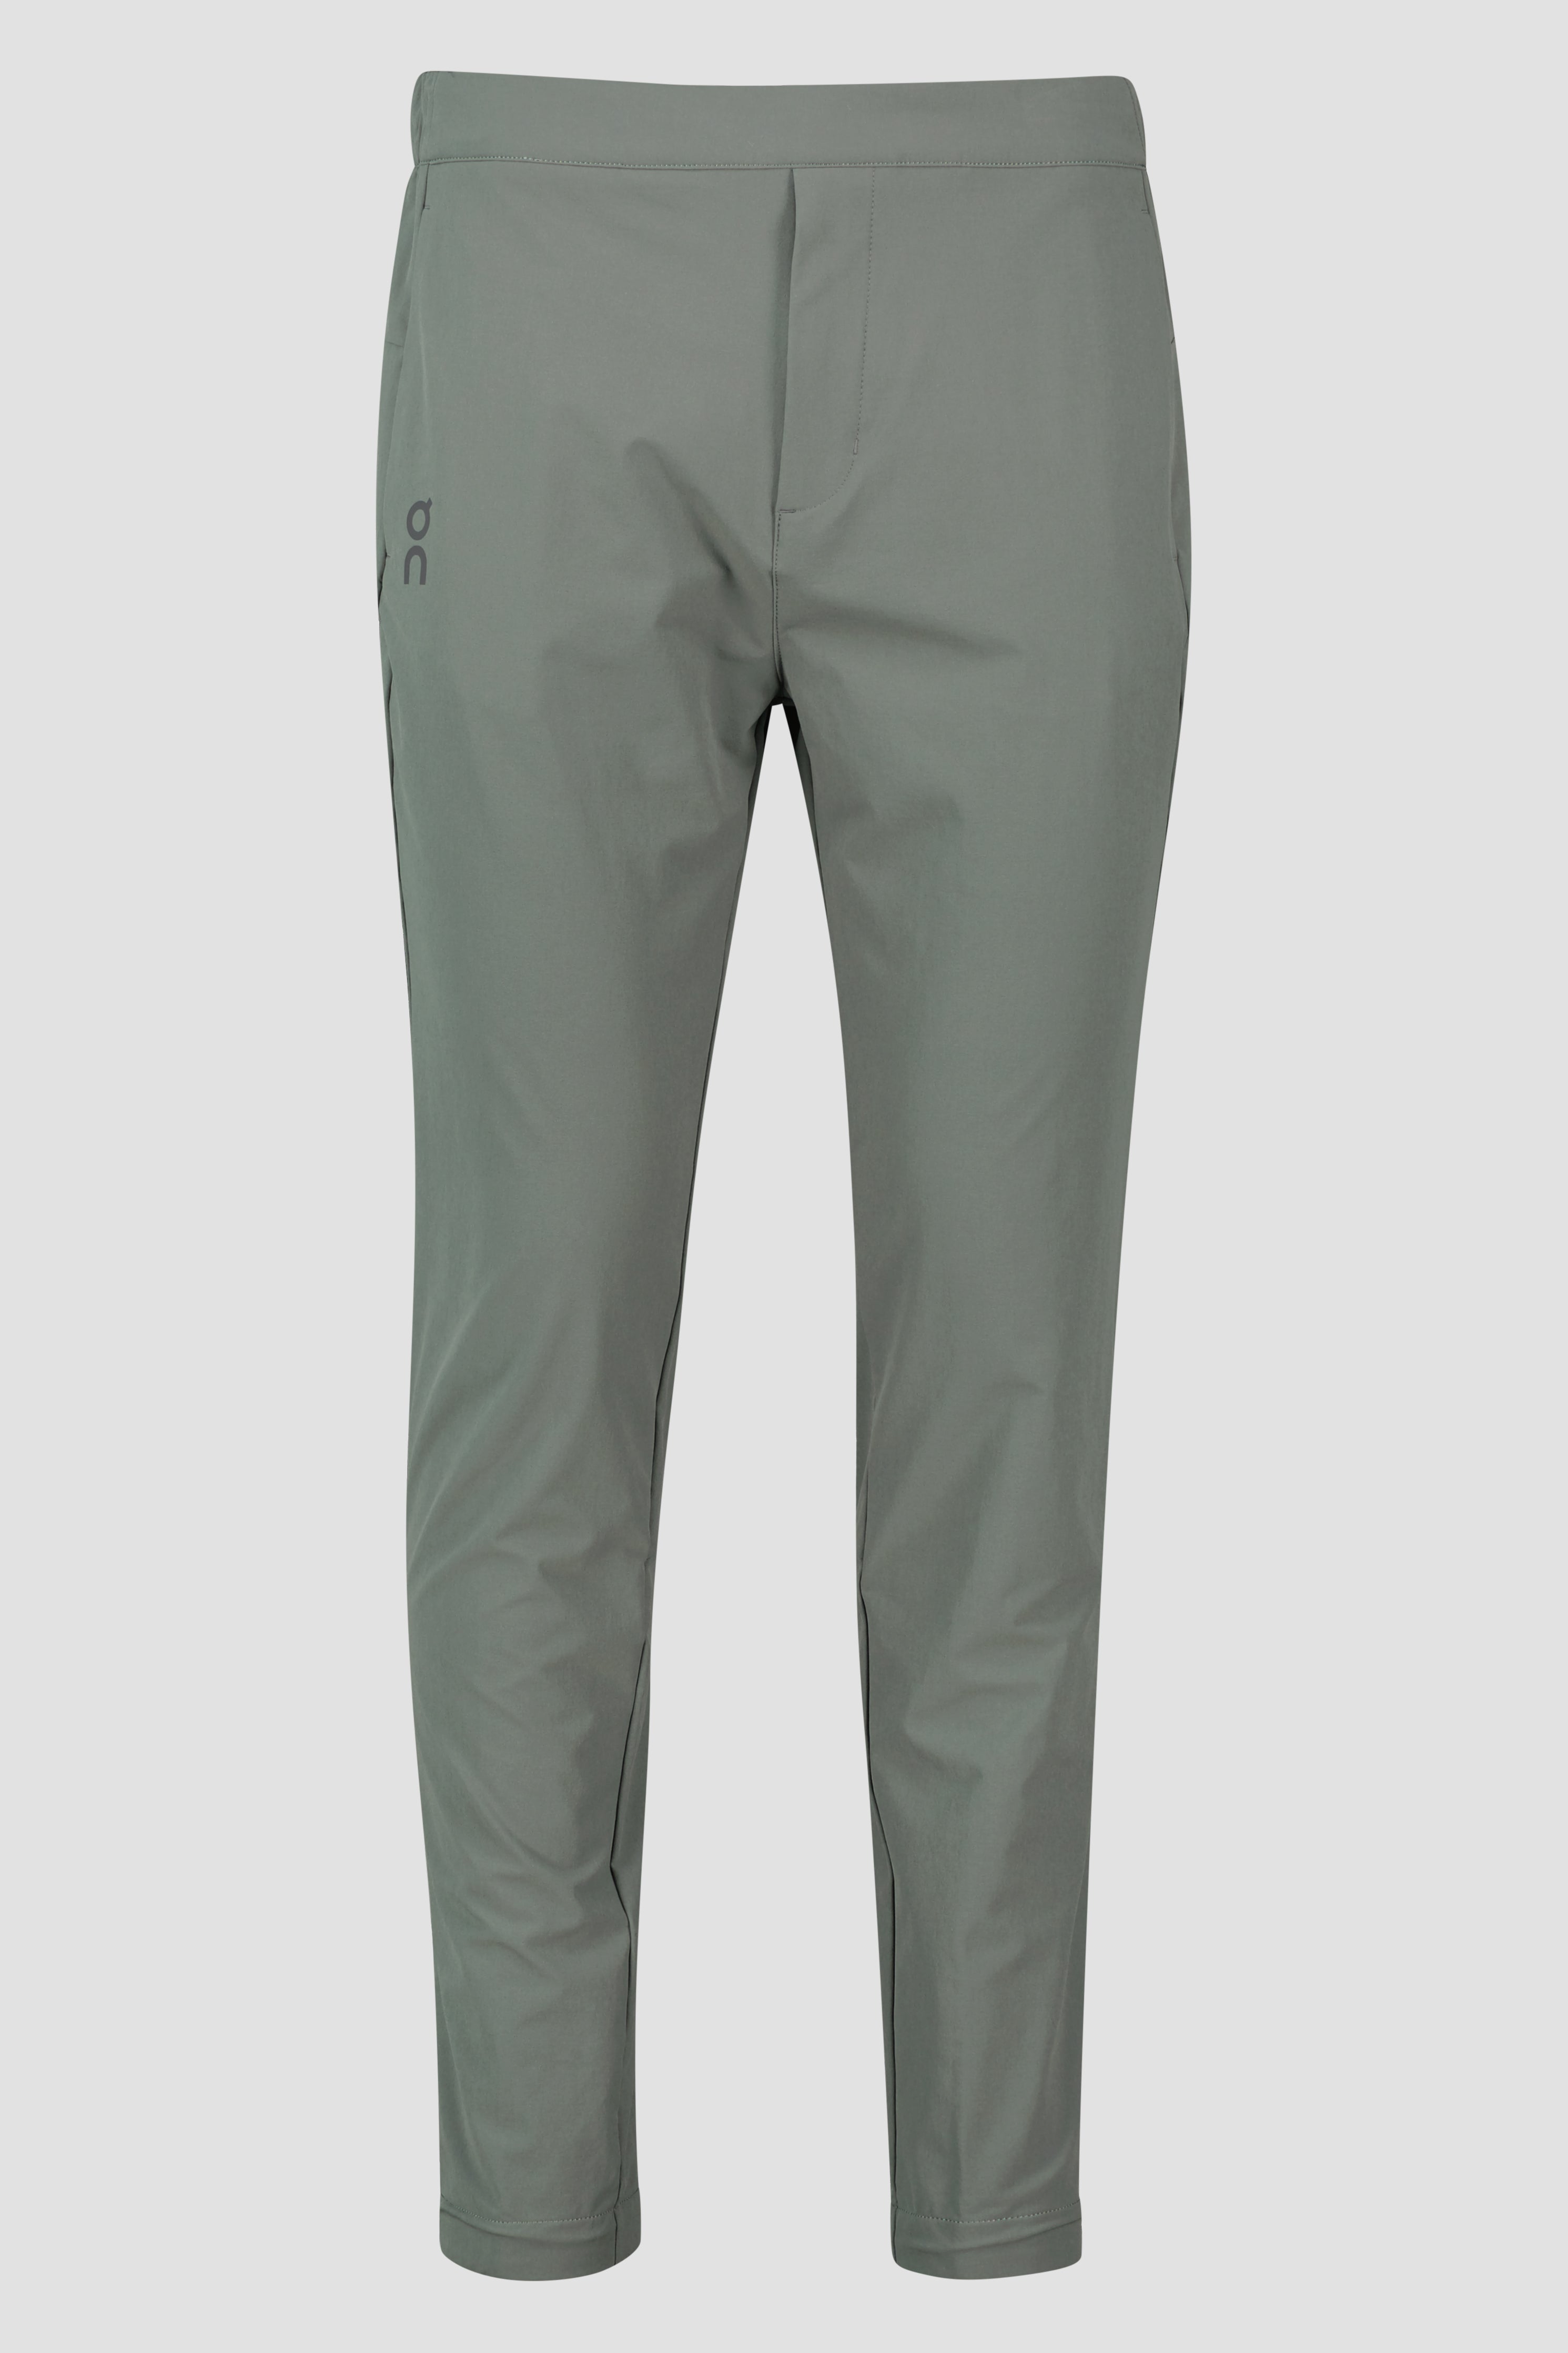 Mens On Running Lead Active Pants